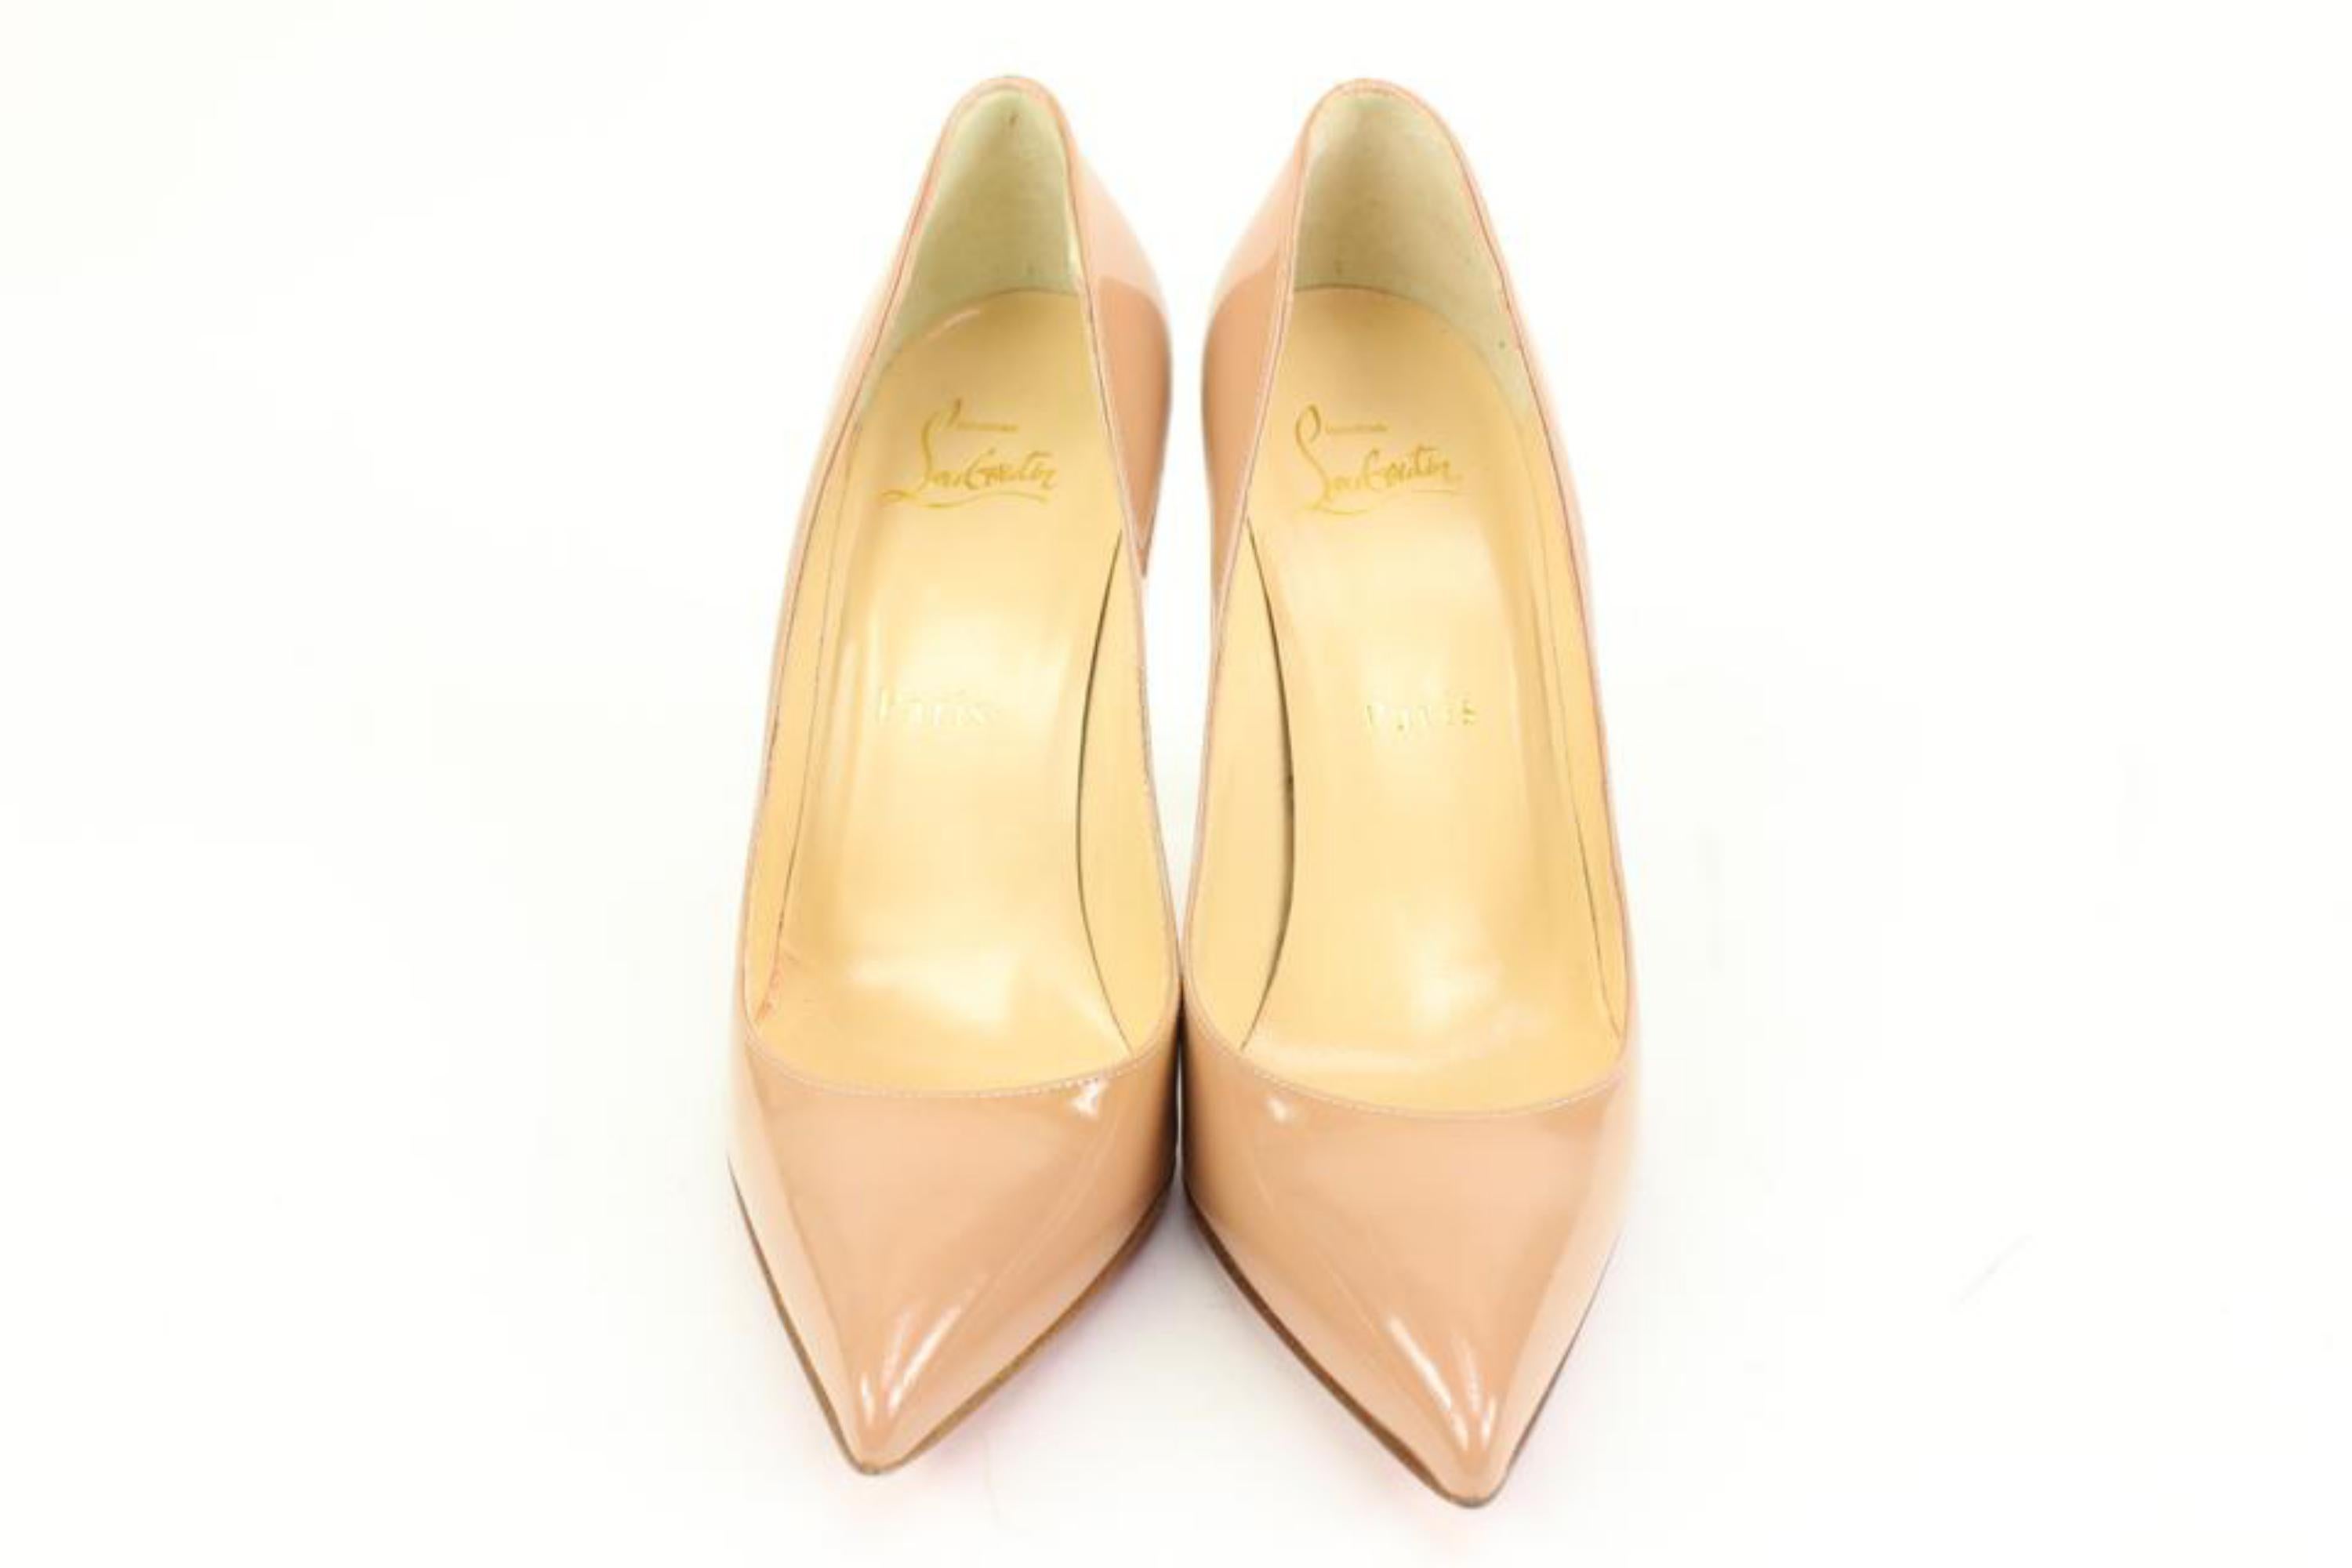 Christian Louboutin Size 36.5 Nude Pigalle Follies Heels 79cl317s In Excellent Condition For Sale In Dix hills, NY